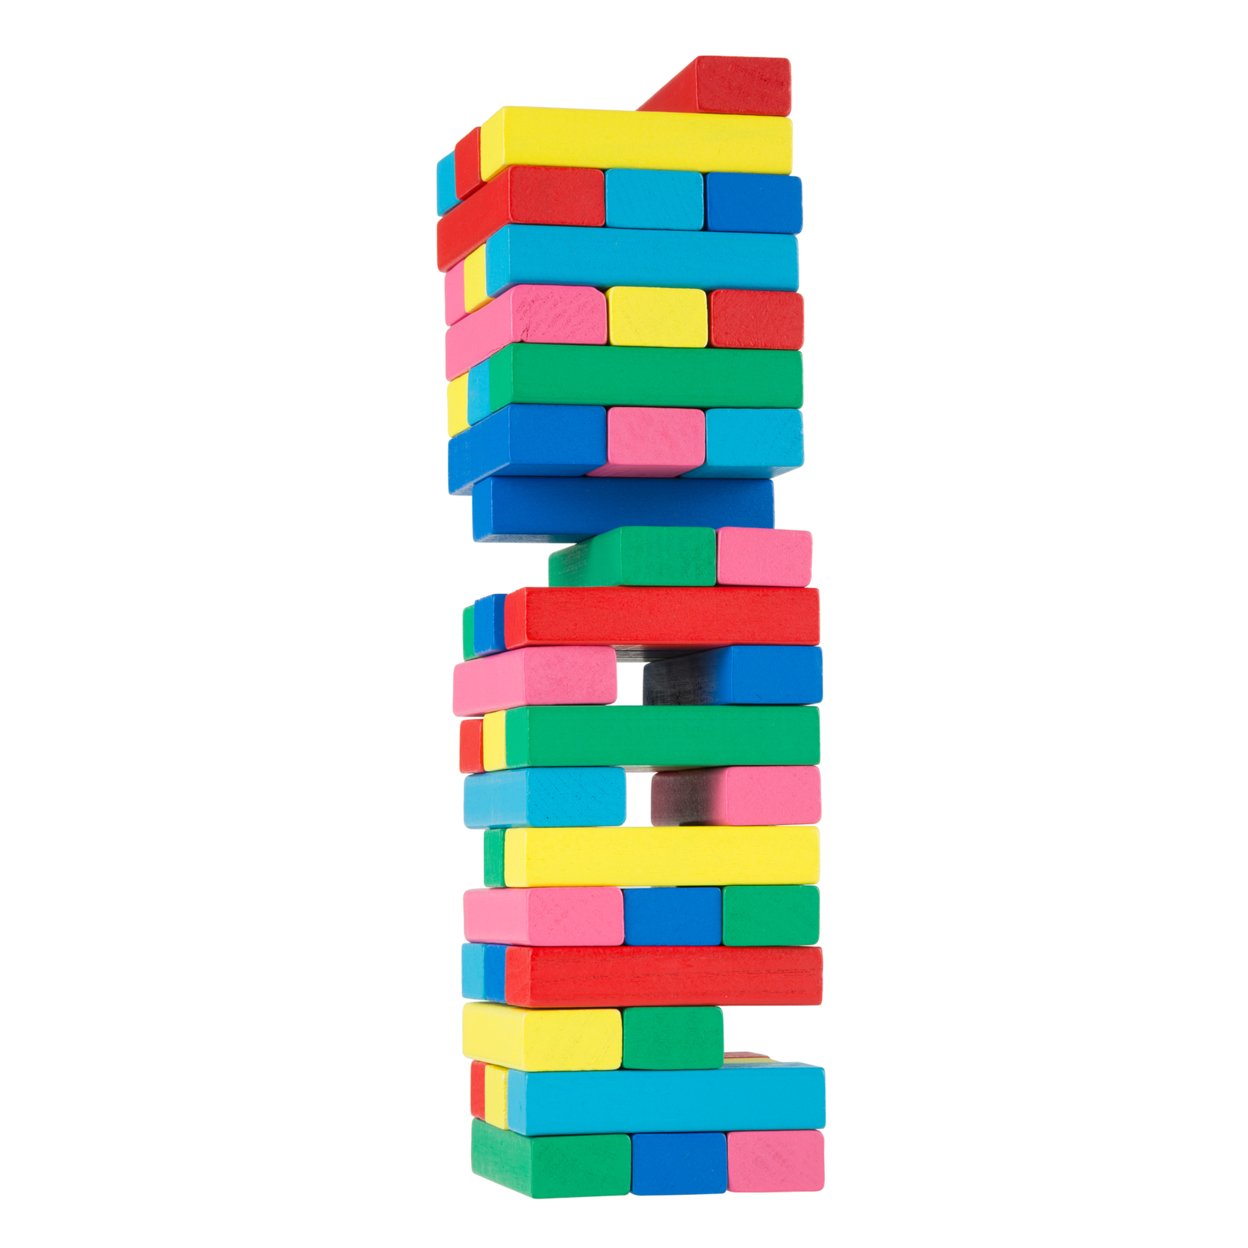 Classic Wooden Blocks Stacking Game With Colored Wood And Carrying Bag